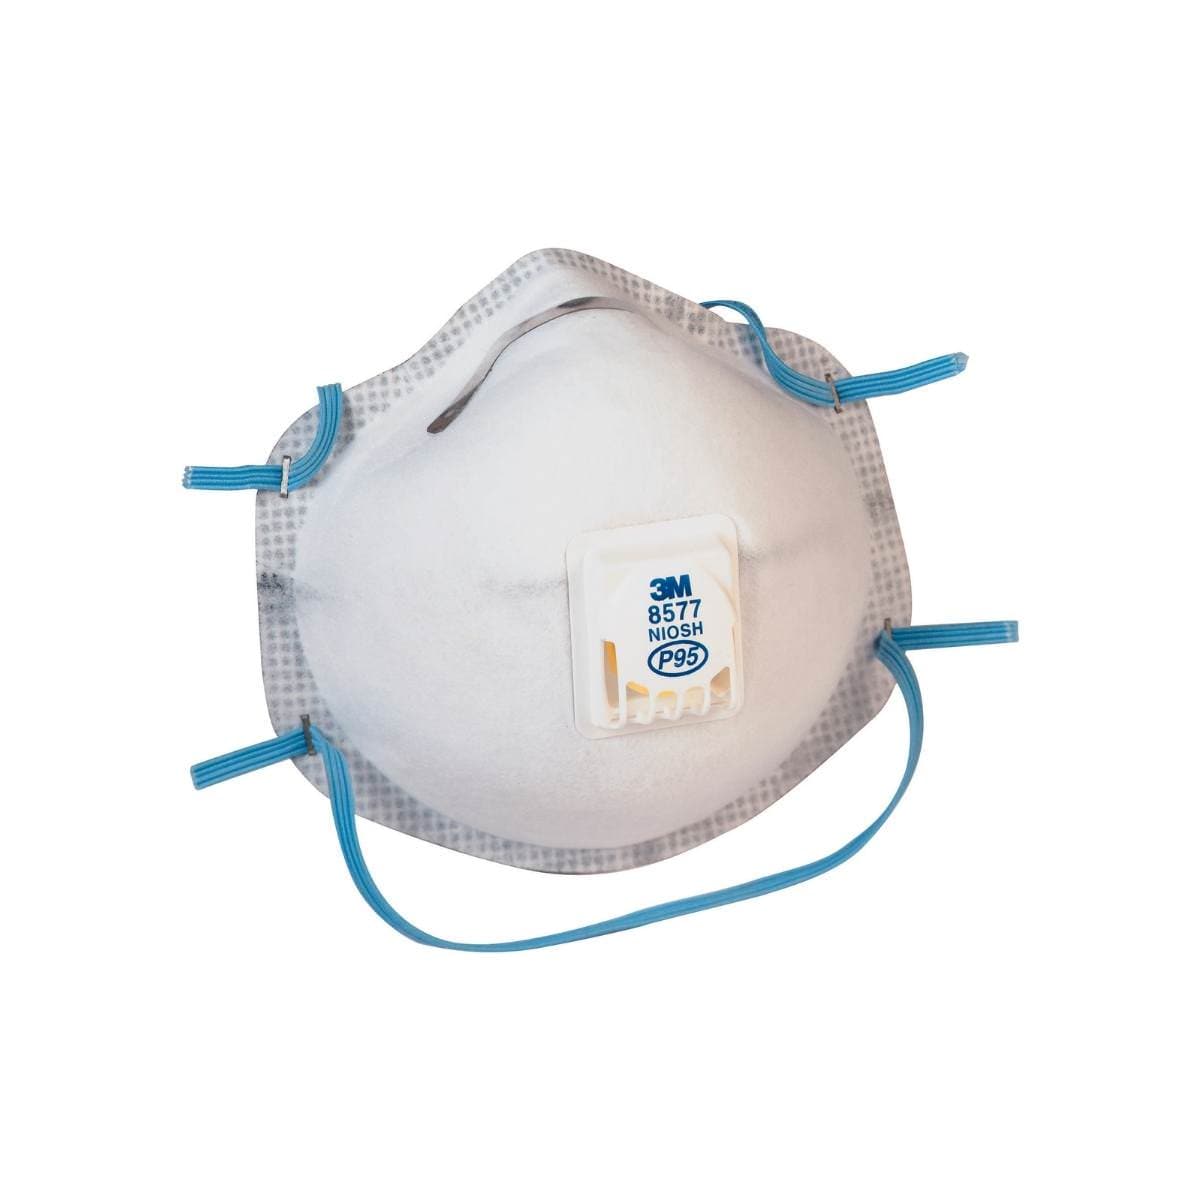 3M™ Cupped Particulate Respirator 8577, GP2, with Nuisance Level* Organic Vapour Relief, valved (Pack of 10)